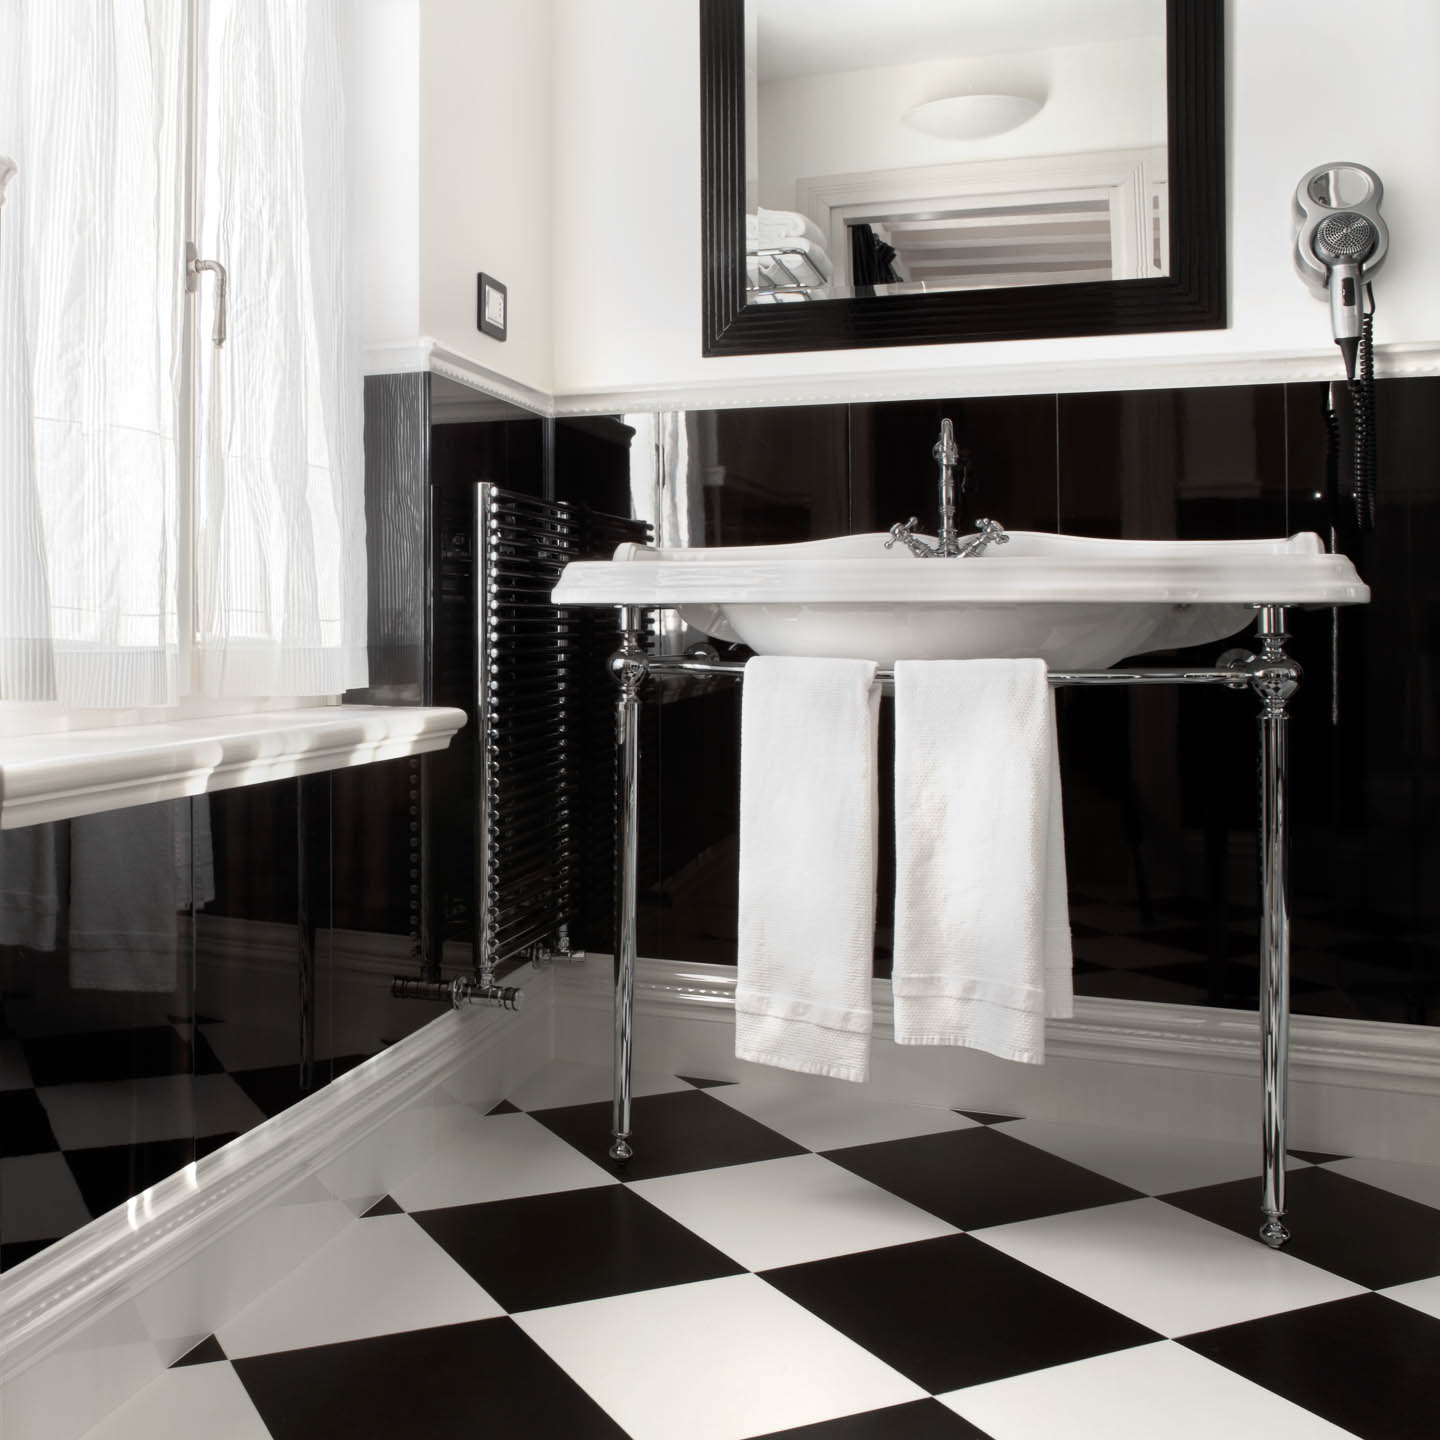 Retro bathroom with checkered black and white floor tiles